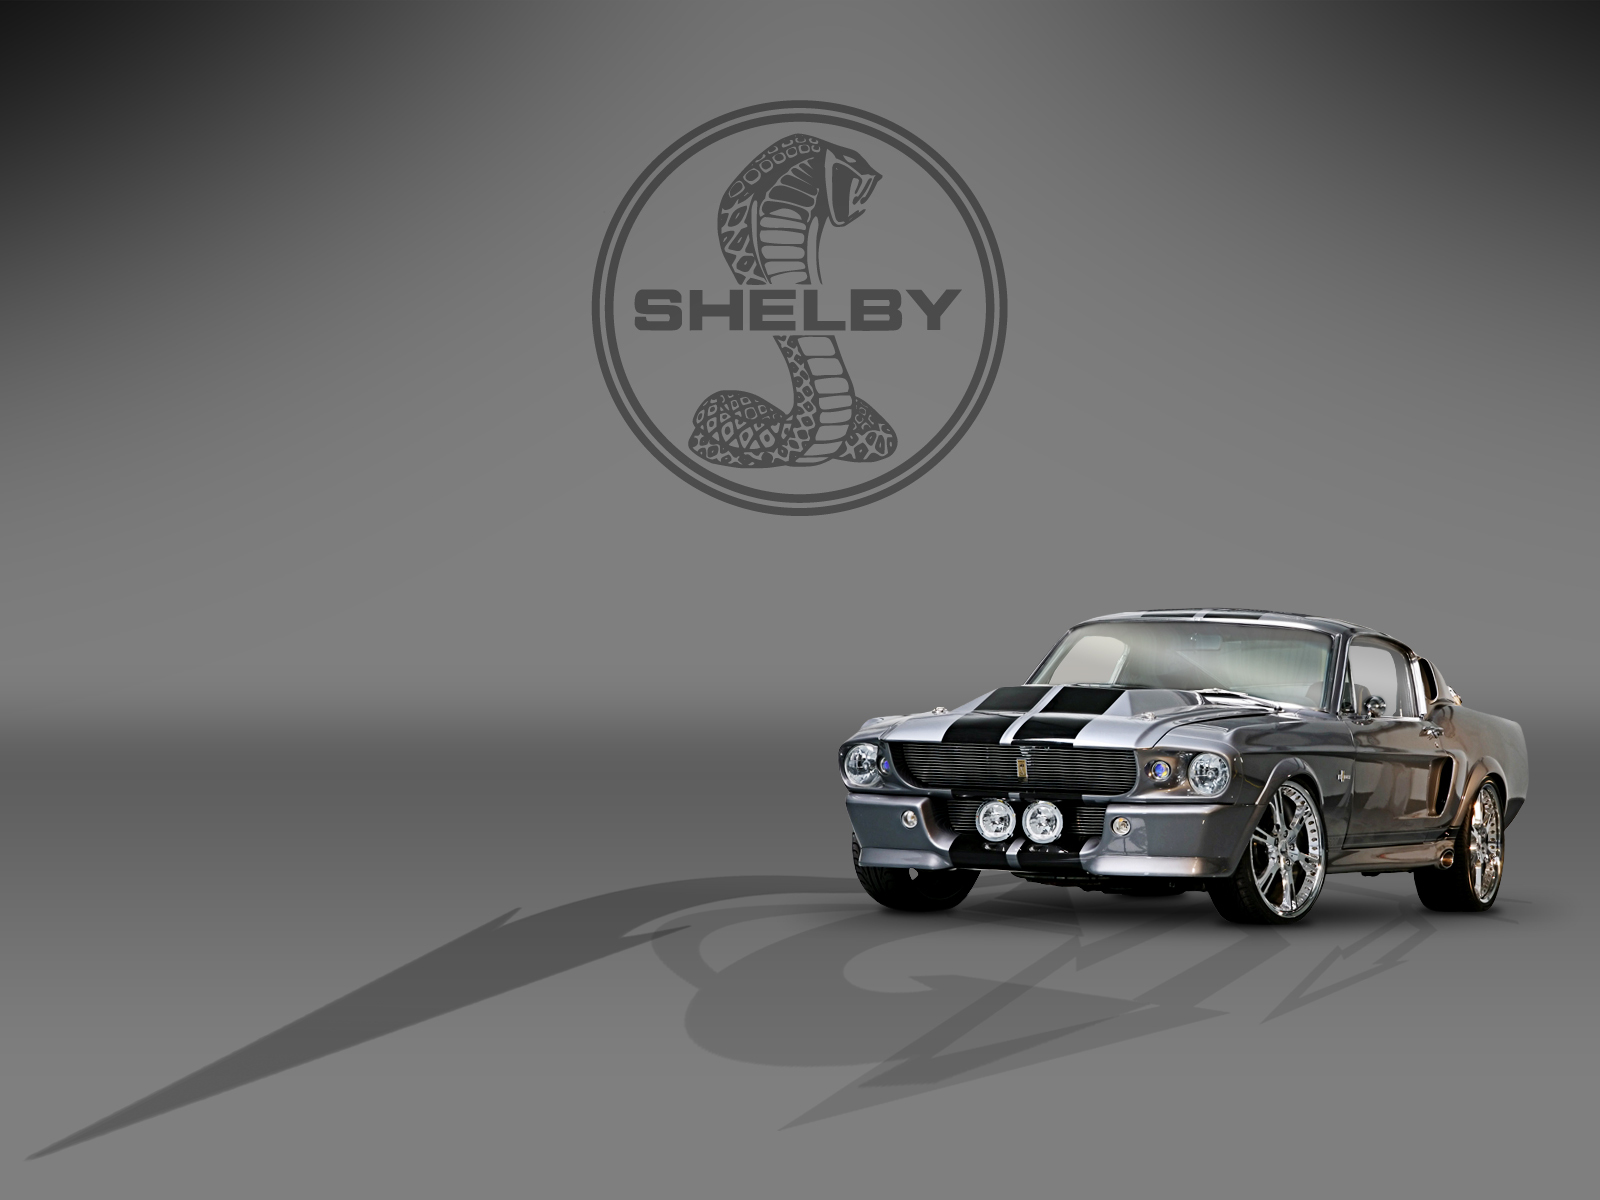 Mustang Image Shelby Gt500 Eleanor Wallpaper Photos